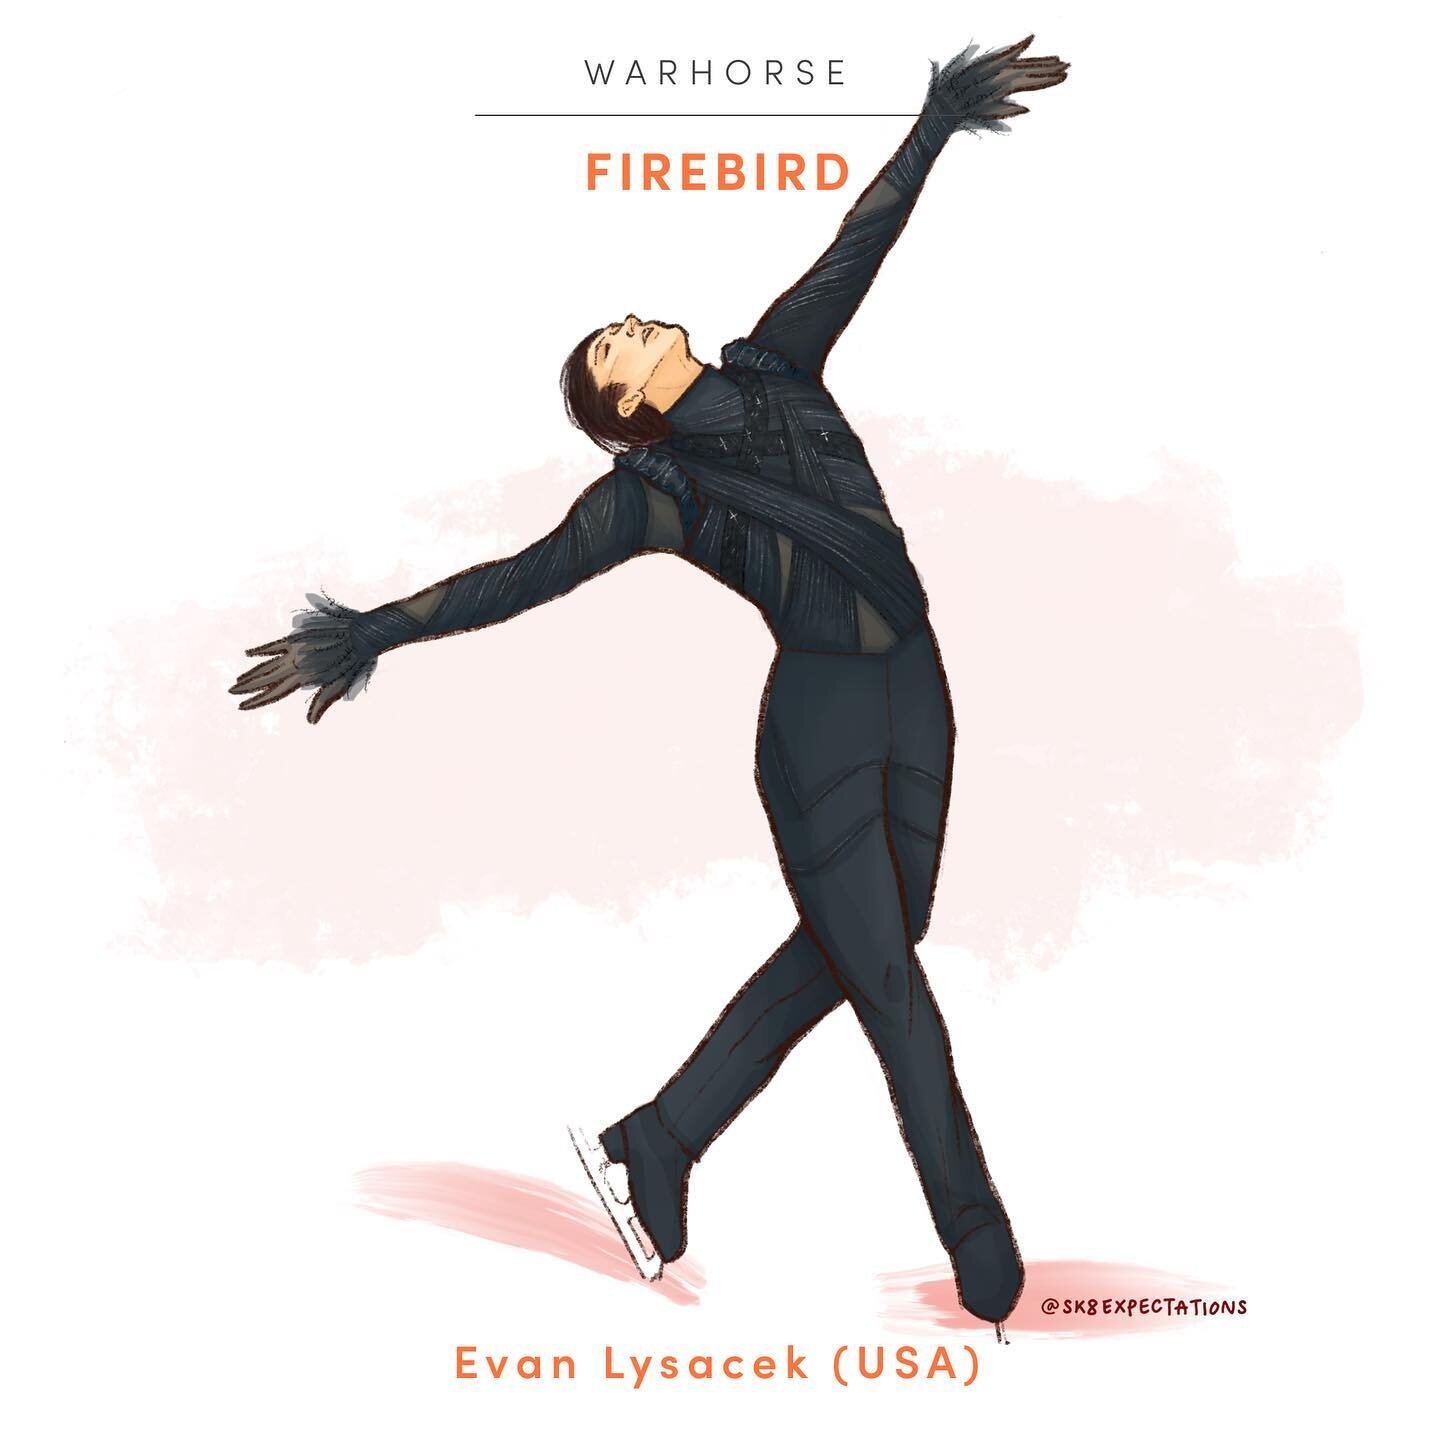 WARHORSE: &ldquo;The Firebird&rdquo; (Igor Stravinsky)
-
HONOURABLE MENTION: Evan Lysacek (USA)
-
2010 Winter Olympic Games, Short Program
-
Choreographed by Lori Nichol 
-
Impeccably well-trained and unflappable amidst a media circus, Lysacek was qu